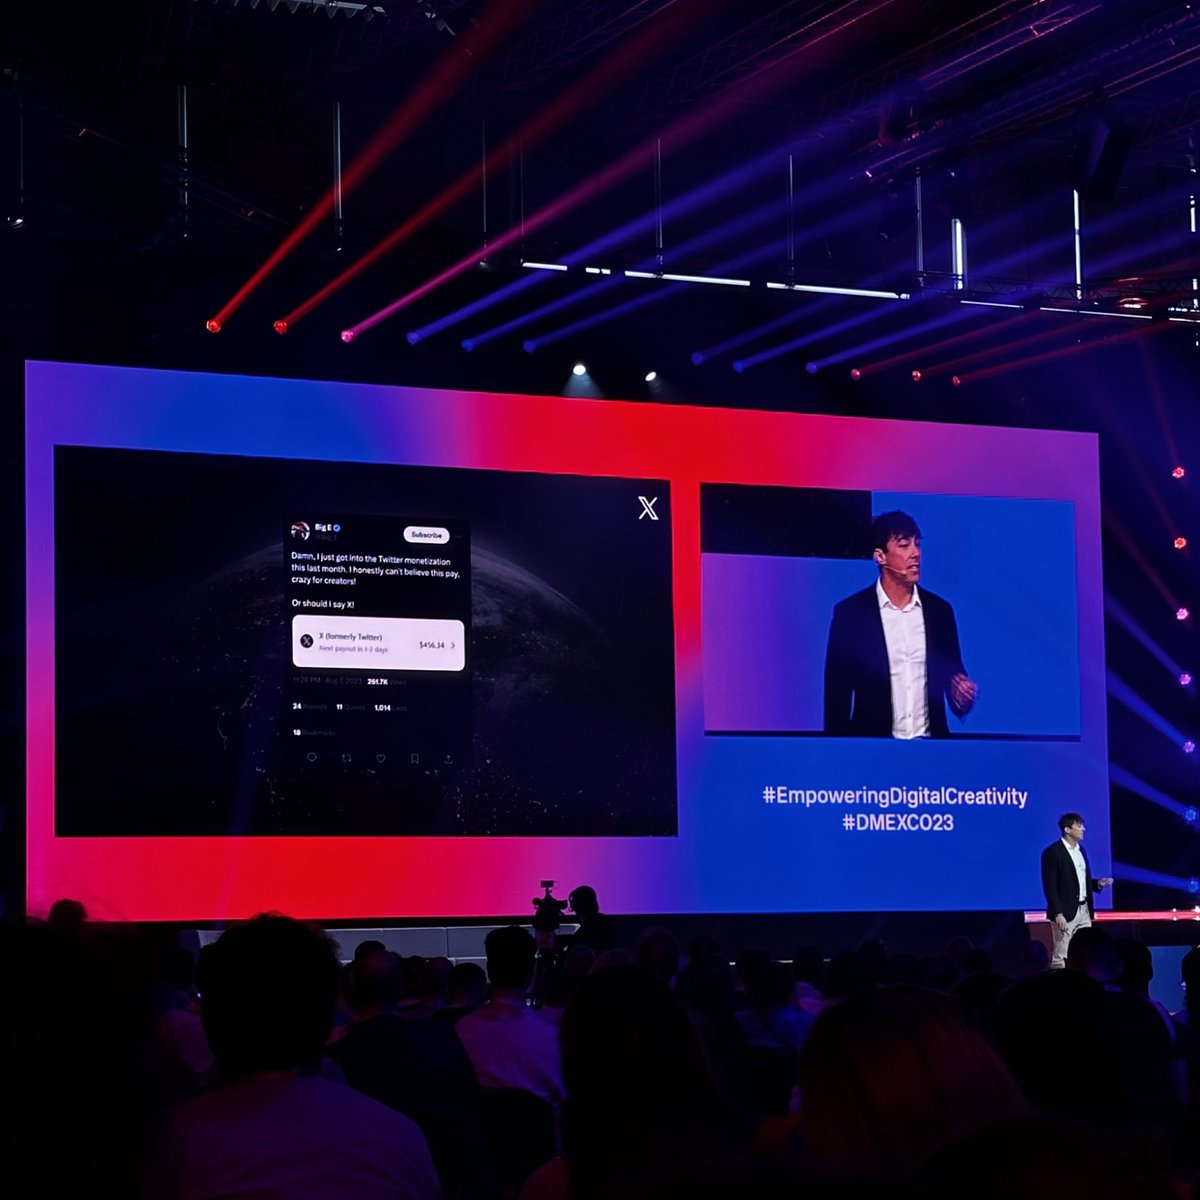 Watching Gregory Owens presenting the future of X at the #DMEXCO23 in cologne germany. Very impressive to see where this brand is going! 

#X #EmpoweringDigitalCreativity